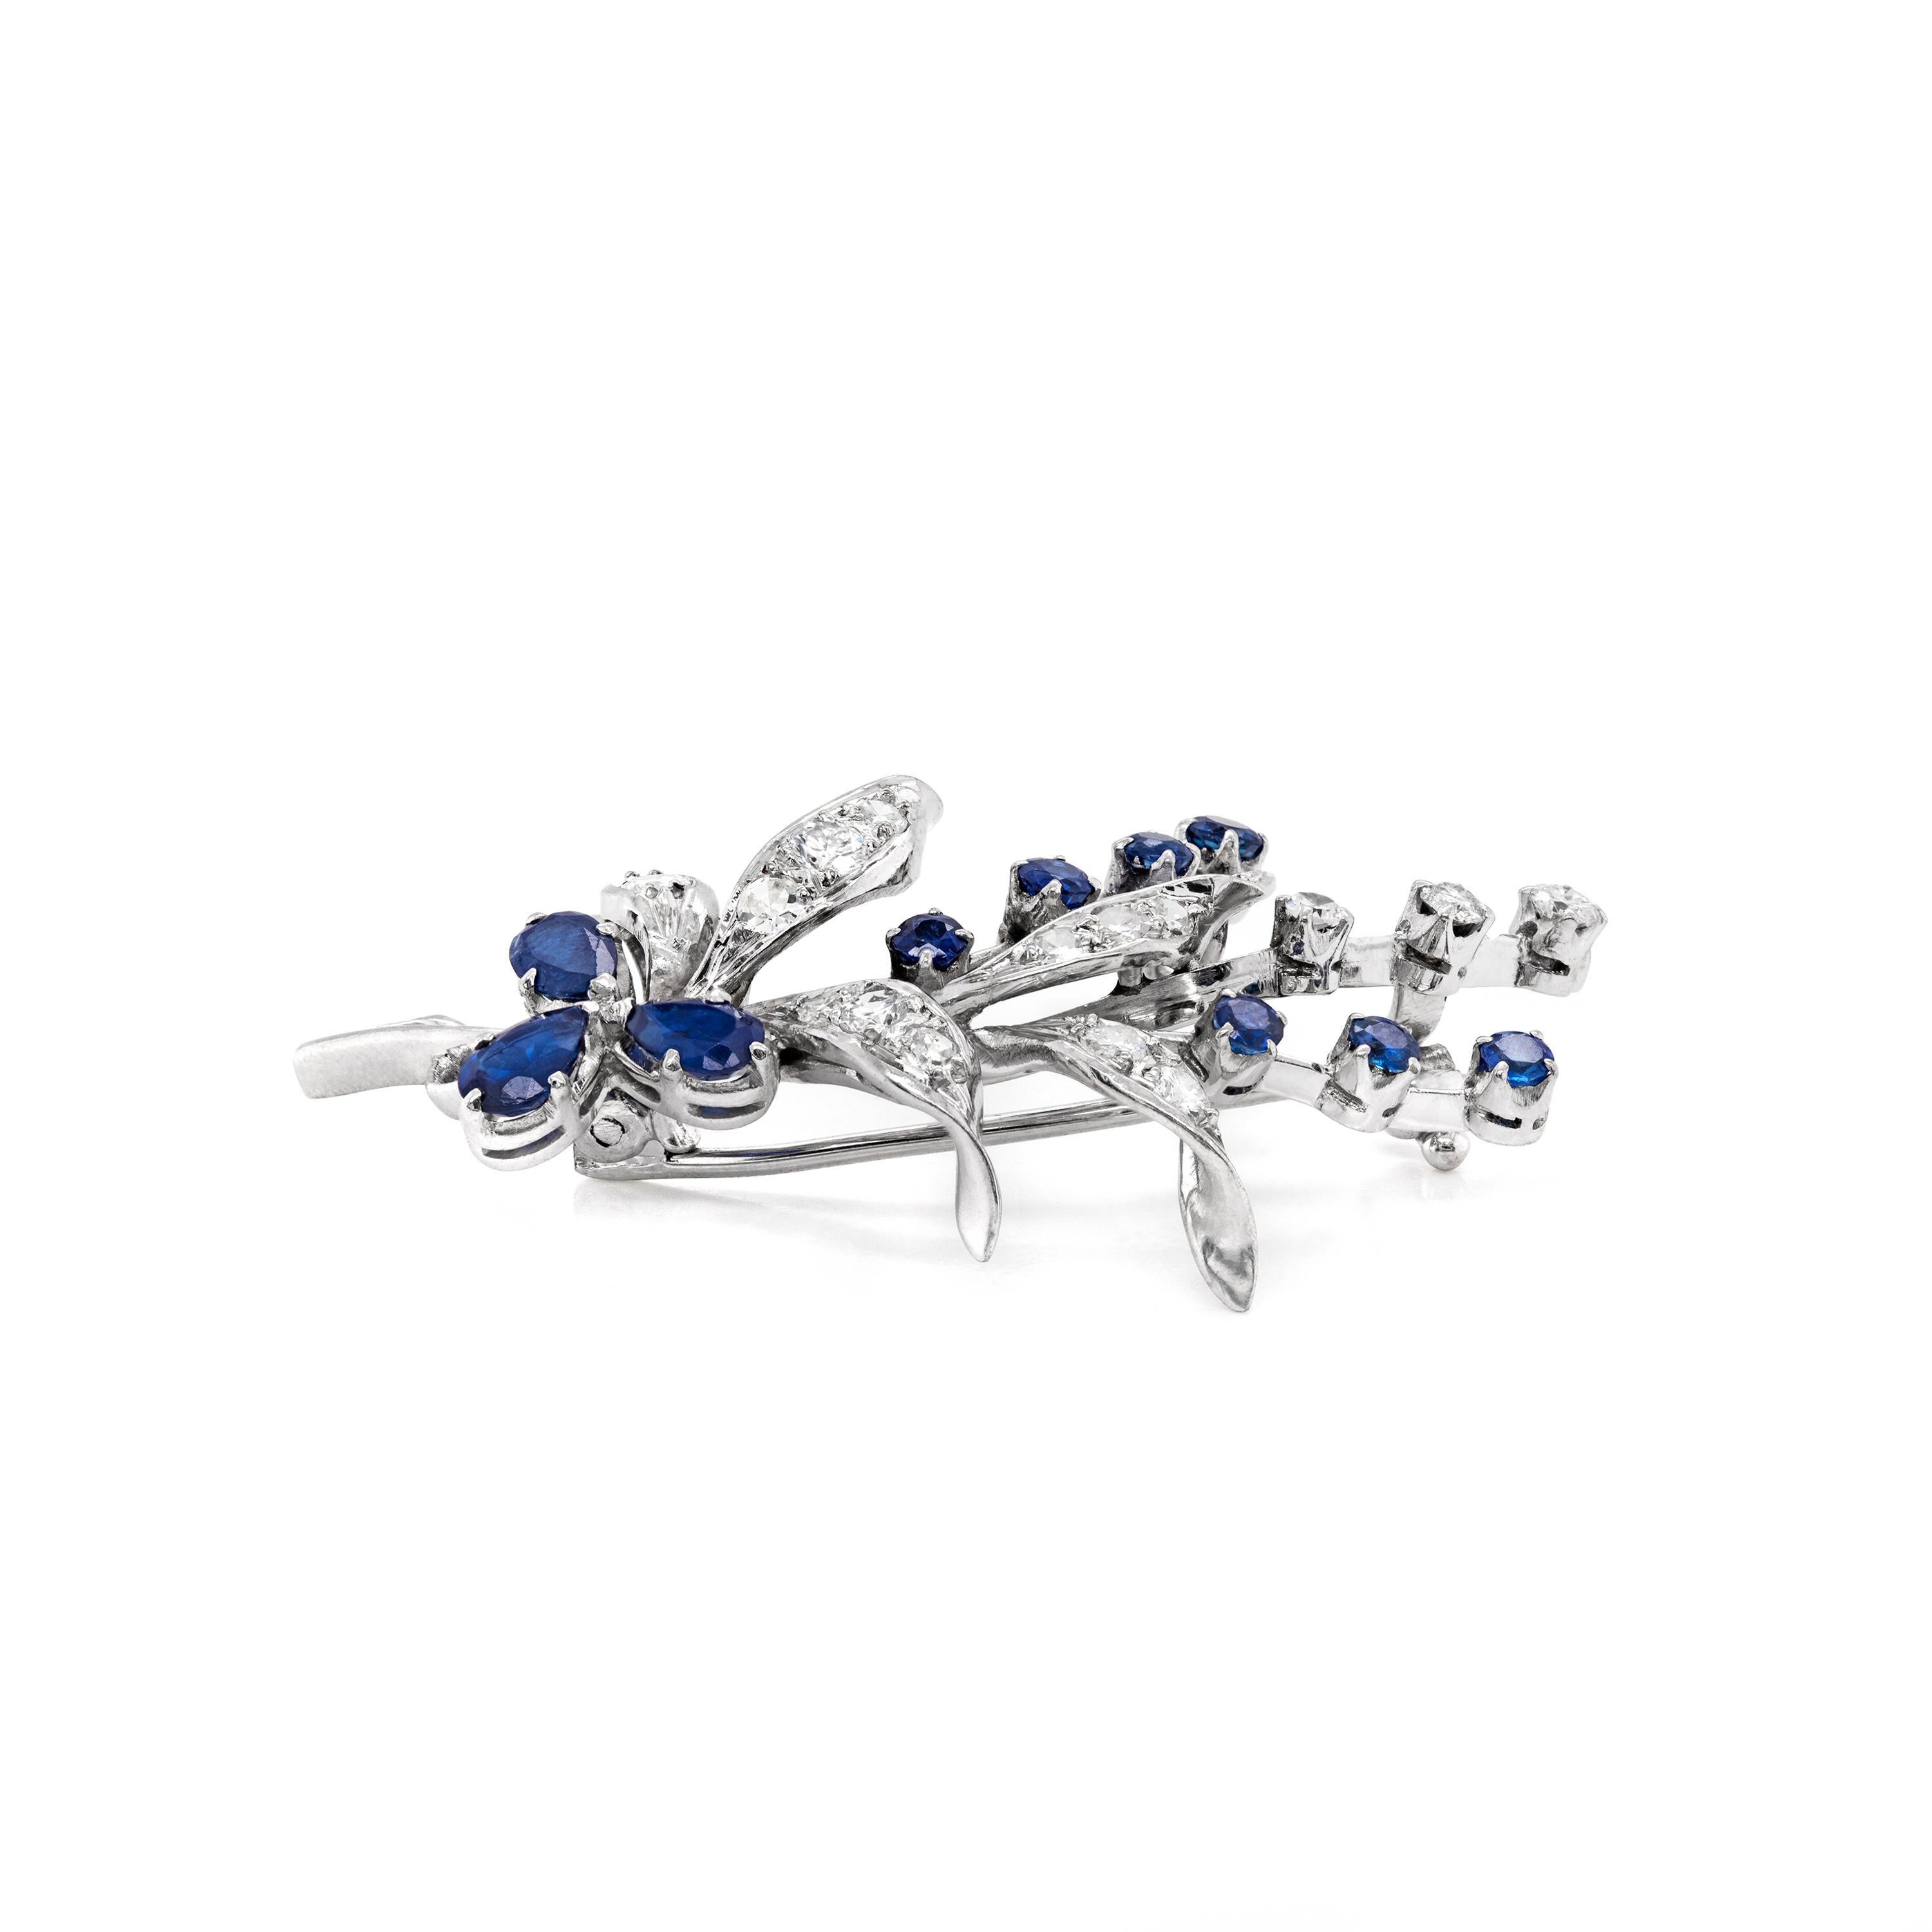 This 1960's floral spray brooch is beautifully designed with a mix of deep blue sapphires and fine quality diamonds for a really wonderful contrast. The piece consists of three pear shaped sapphires and seven round cut sapphires totaling to